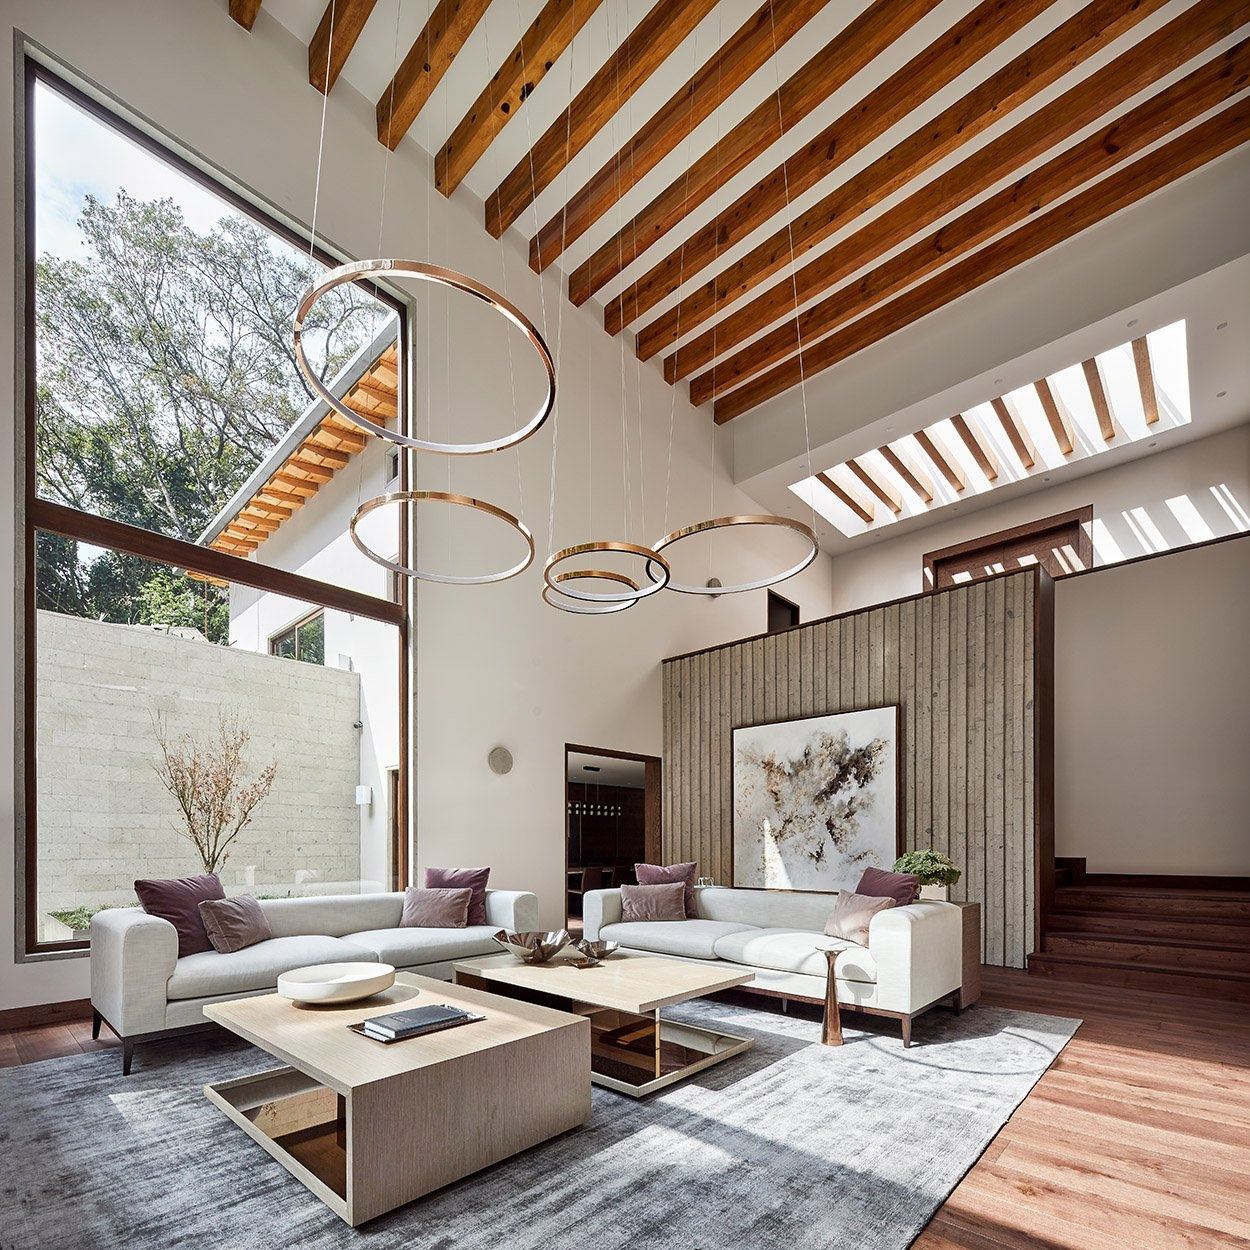 CDC12: Breathtaking House Design by NURBANA in Mexico City